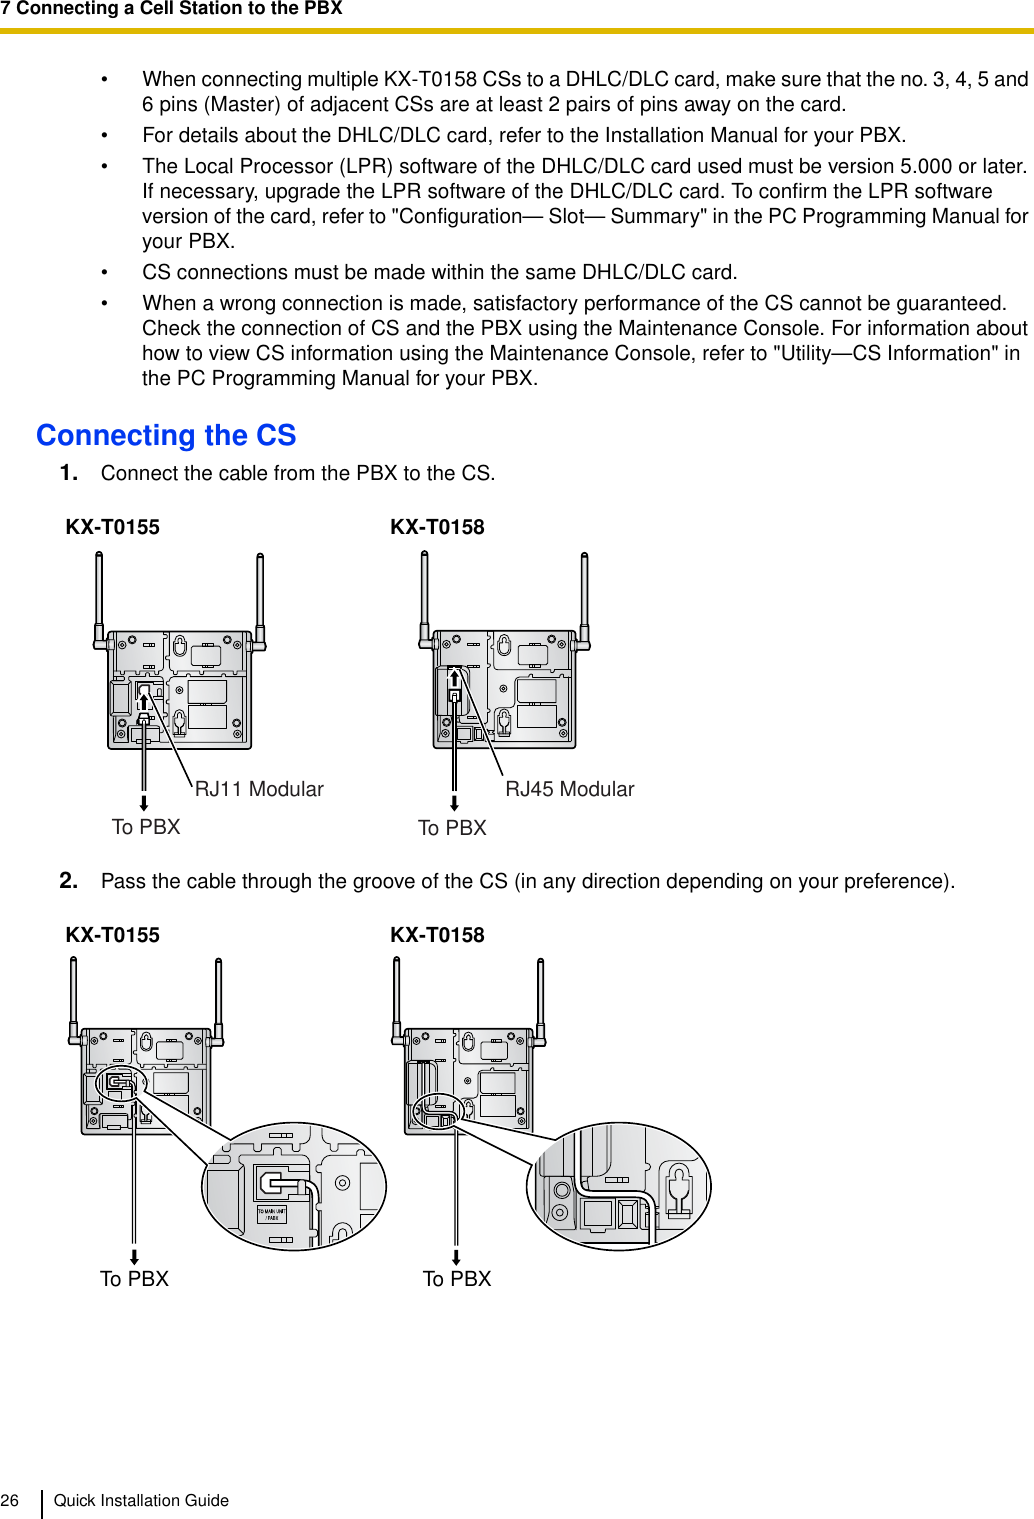 7 Connecting a Cell Station to the PBX26 Quick Installation Guide• When connecting multiple KX-T0158 CSs to a DHLC/DLC card, make sure that the no. 3, 4, 5 and 6 pins (Master) of adjacent CSs are at least 2 pairs of pins away on the card.• For details about the DHLC/DLC card, refer to the Installation Manual for your PBX.• The Local Processor (LPR) software of the DHLC/DLC card used must be version 5.000 or later. If necessary, upgrade the LPR software of the DHLC/DLC card. To confirm the LPR software version of the card, refer to &quot;Configuration— Slot— Summary&quot; in the PC Programming Manual for your PBX.• CS connections must be made within the same DHLC/DLC card.• When a wrong connection is made, satisfactory performance of the CS cannot be guaranteed. Check the connection of CS and the PBX using the Maintenance Console. For information about how to view CS information using the Maintenance Console, refer to &quot;Utility—CS Information&quot; in the PC Programming Manual for your PBX. Connecting the CS1. Connect the cable from the PBX to the CS.2. Pass the cable through the groove of the CS (in any direction depending on your preference).KX-T0155 KX-T0158KX-T0155 KX-T0158RJ11 ModularTo PBXRJ45 ModularTo PBXTo PBXTo PBX